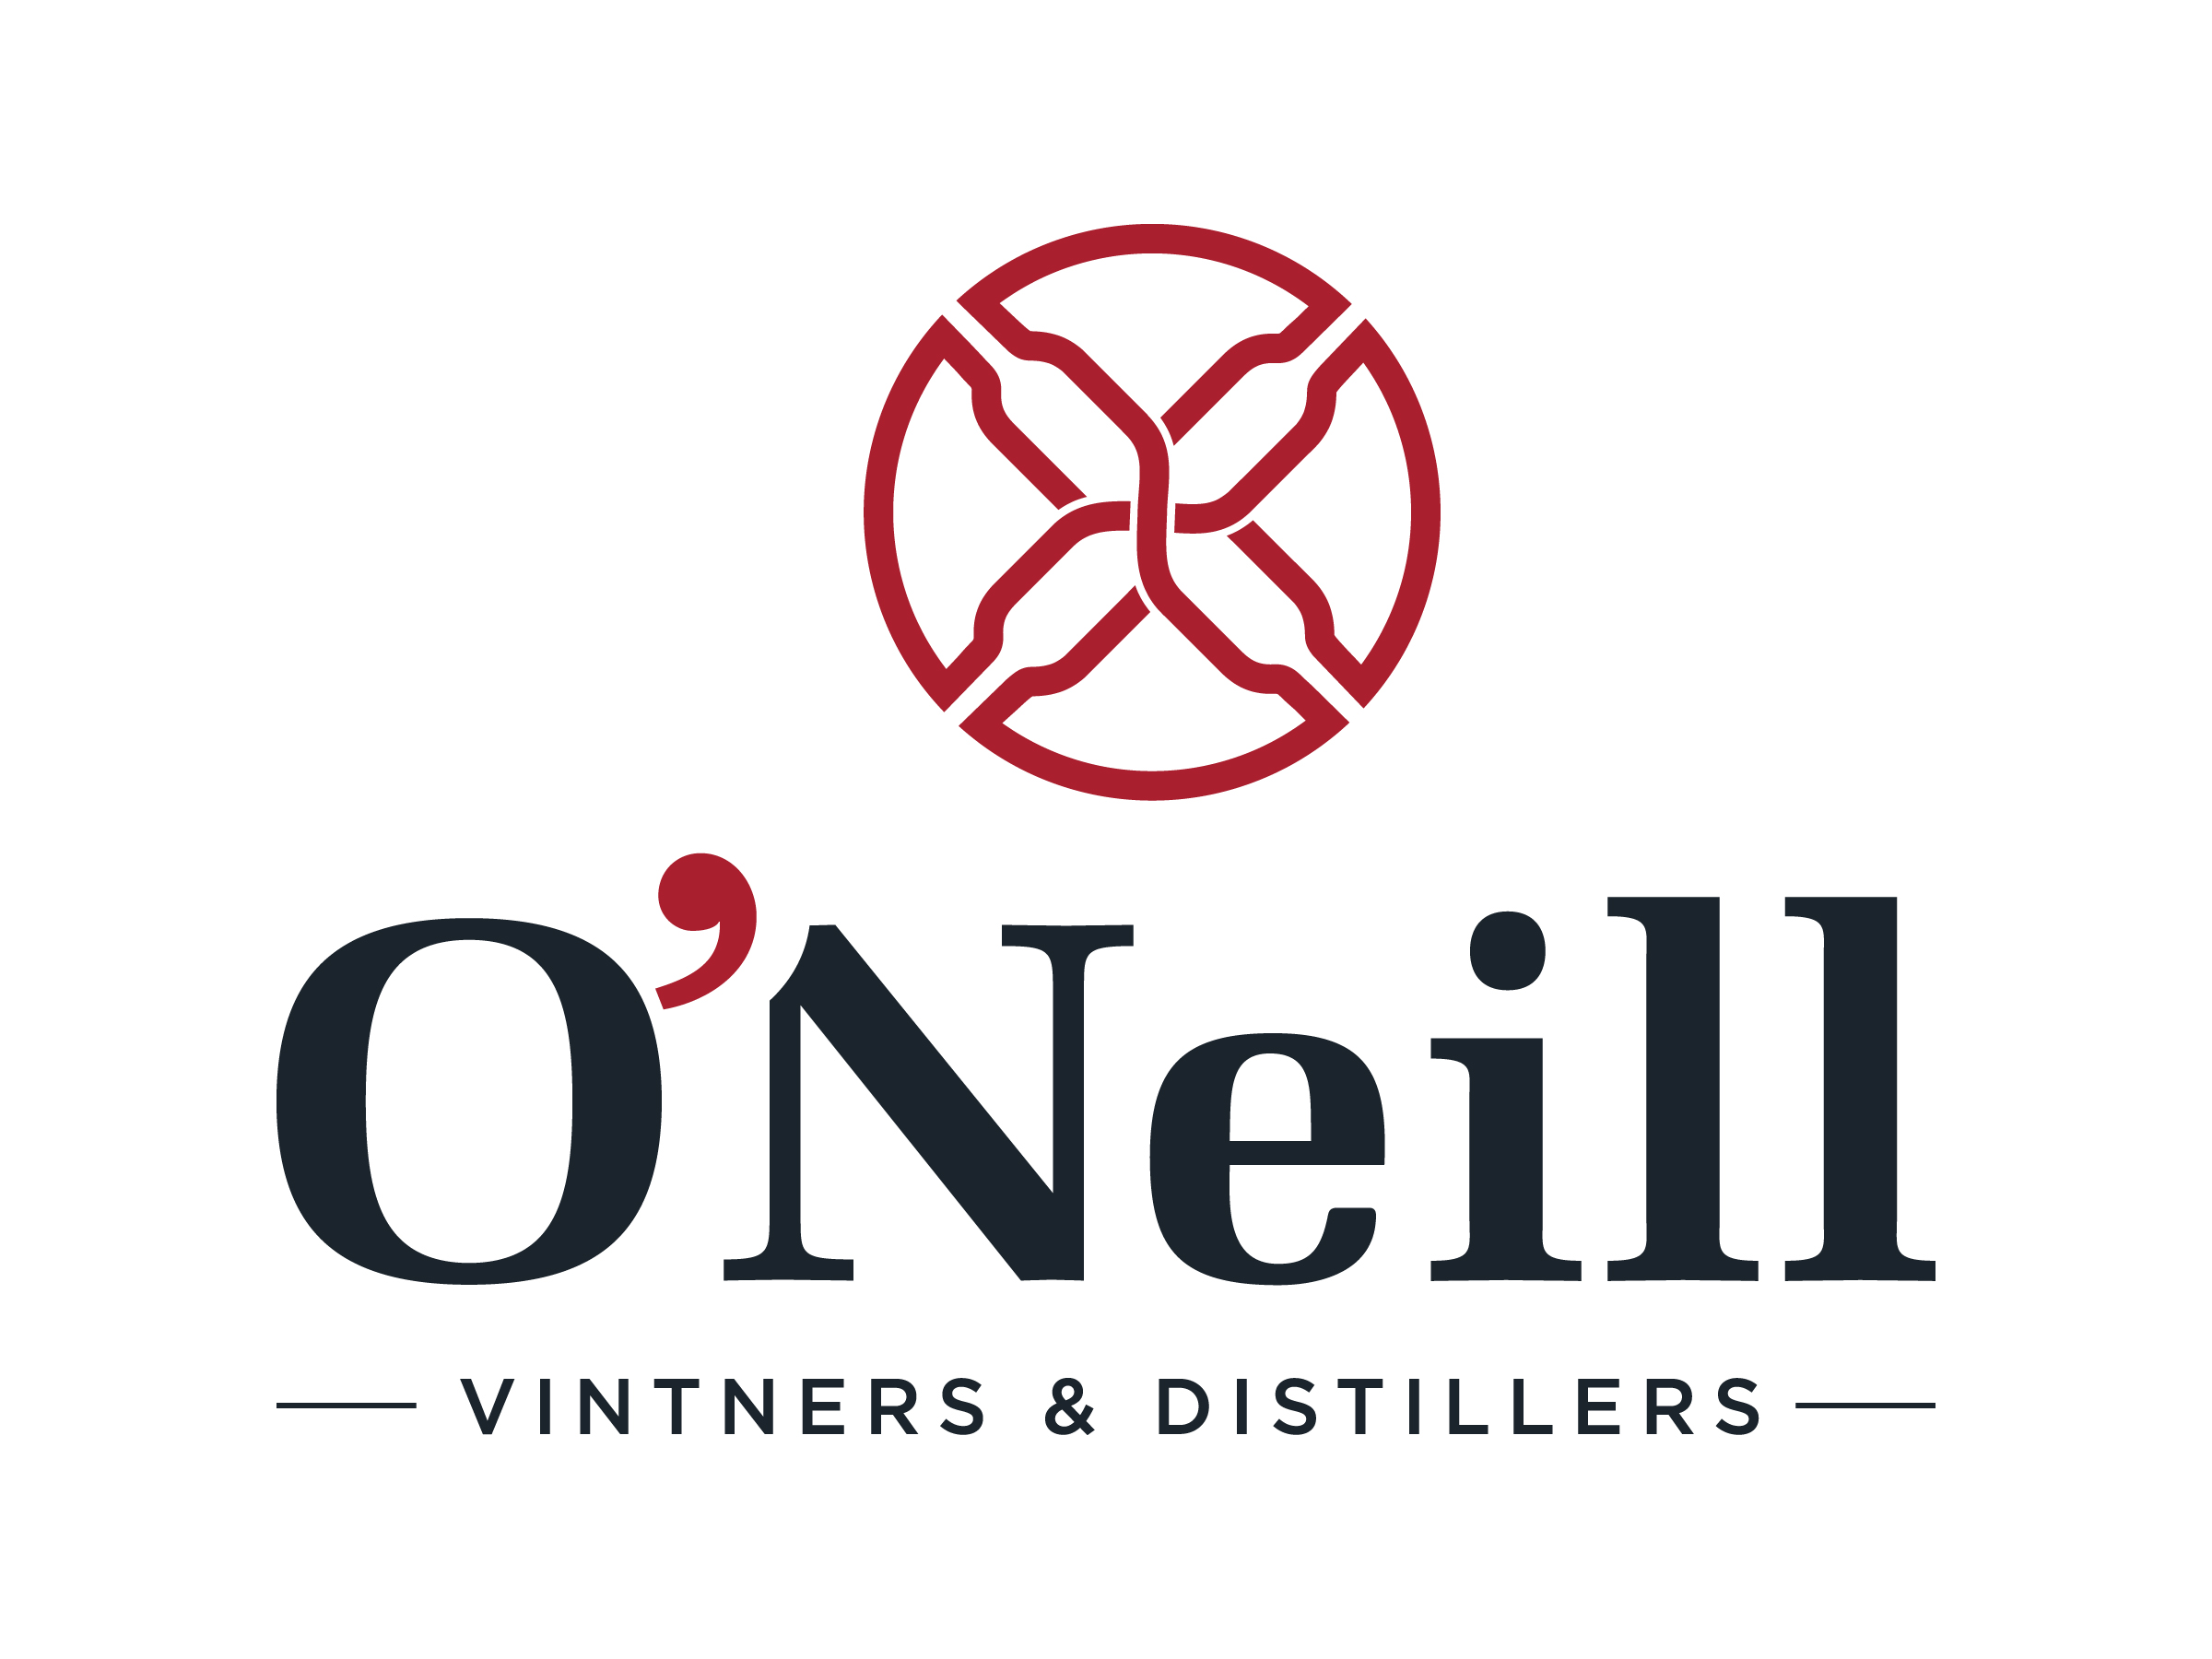 O'Neill Vintners and Distillers